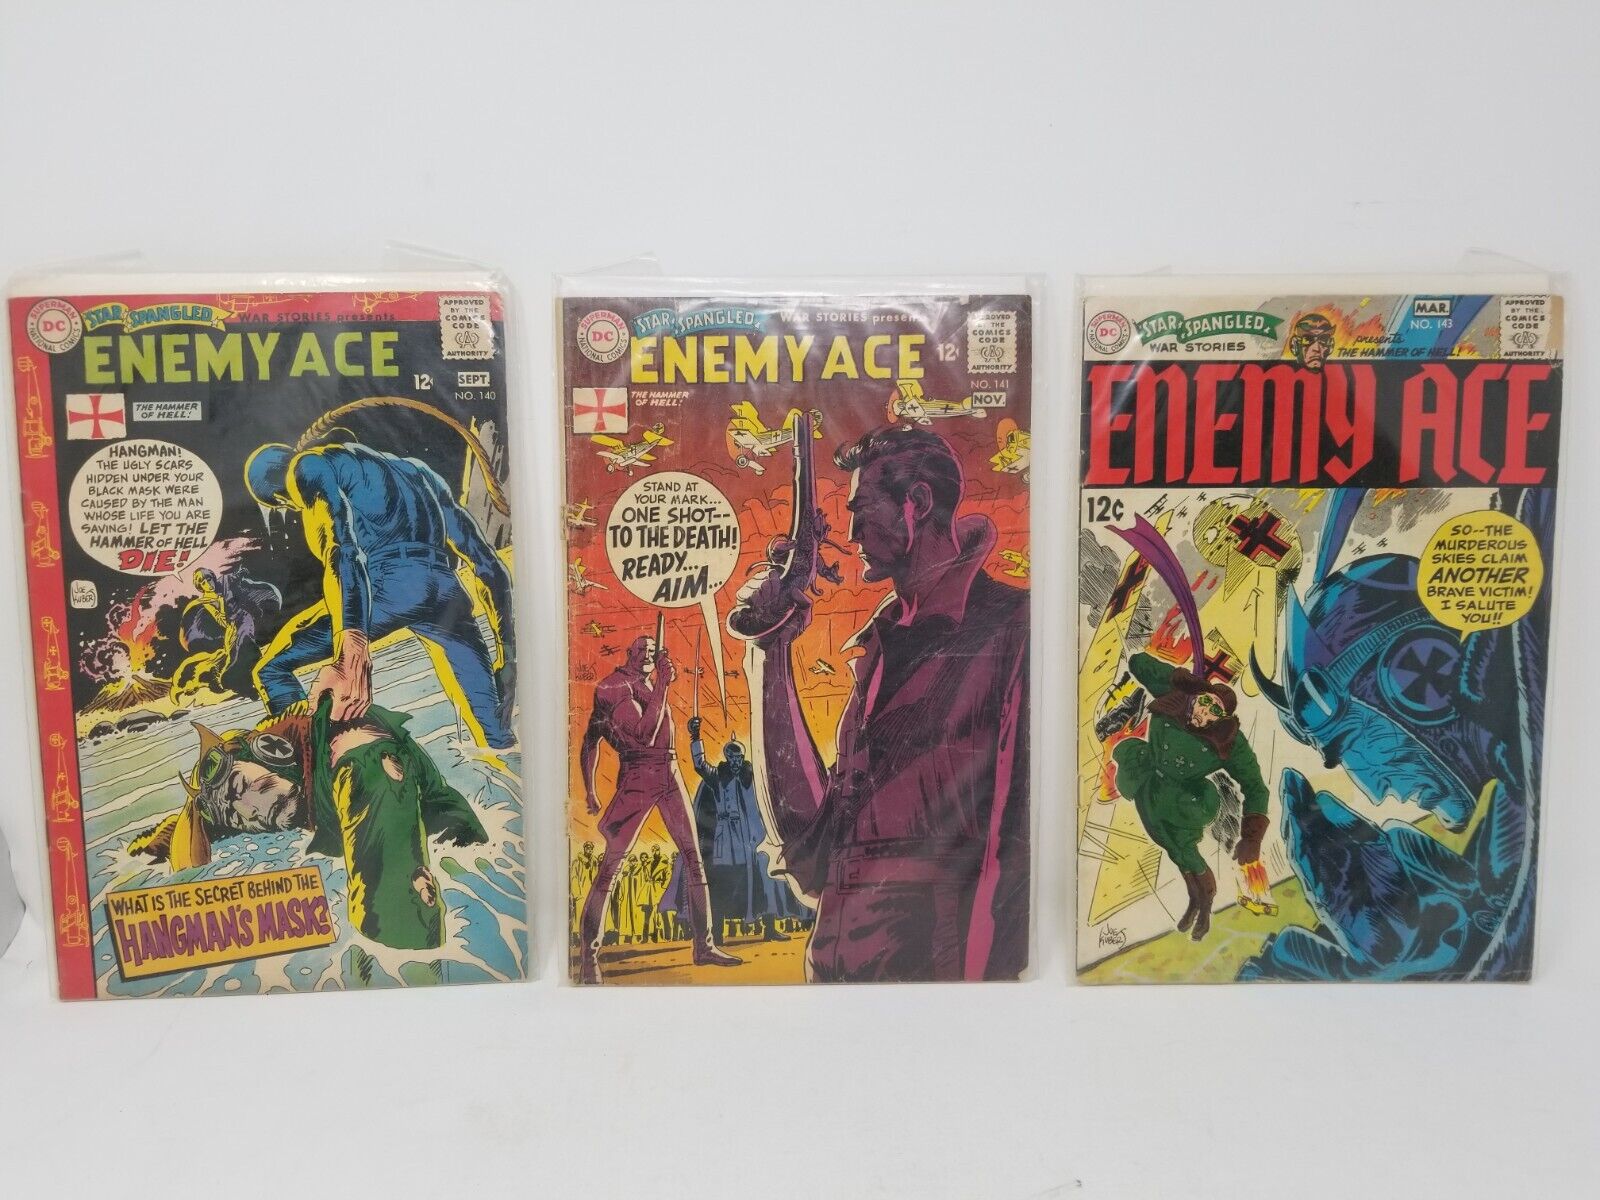 3 Star Spangled War Stories Enemy Ace #140, #141, & #143 DC Comic Books